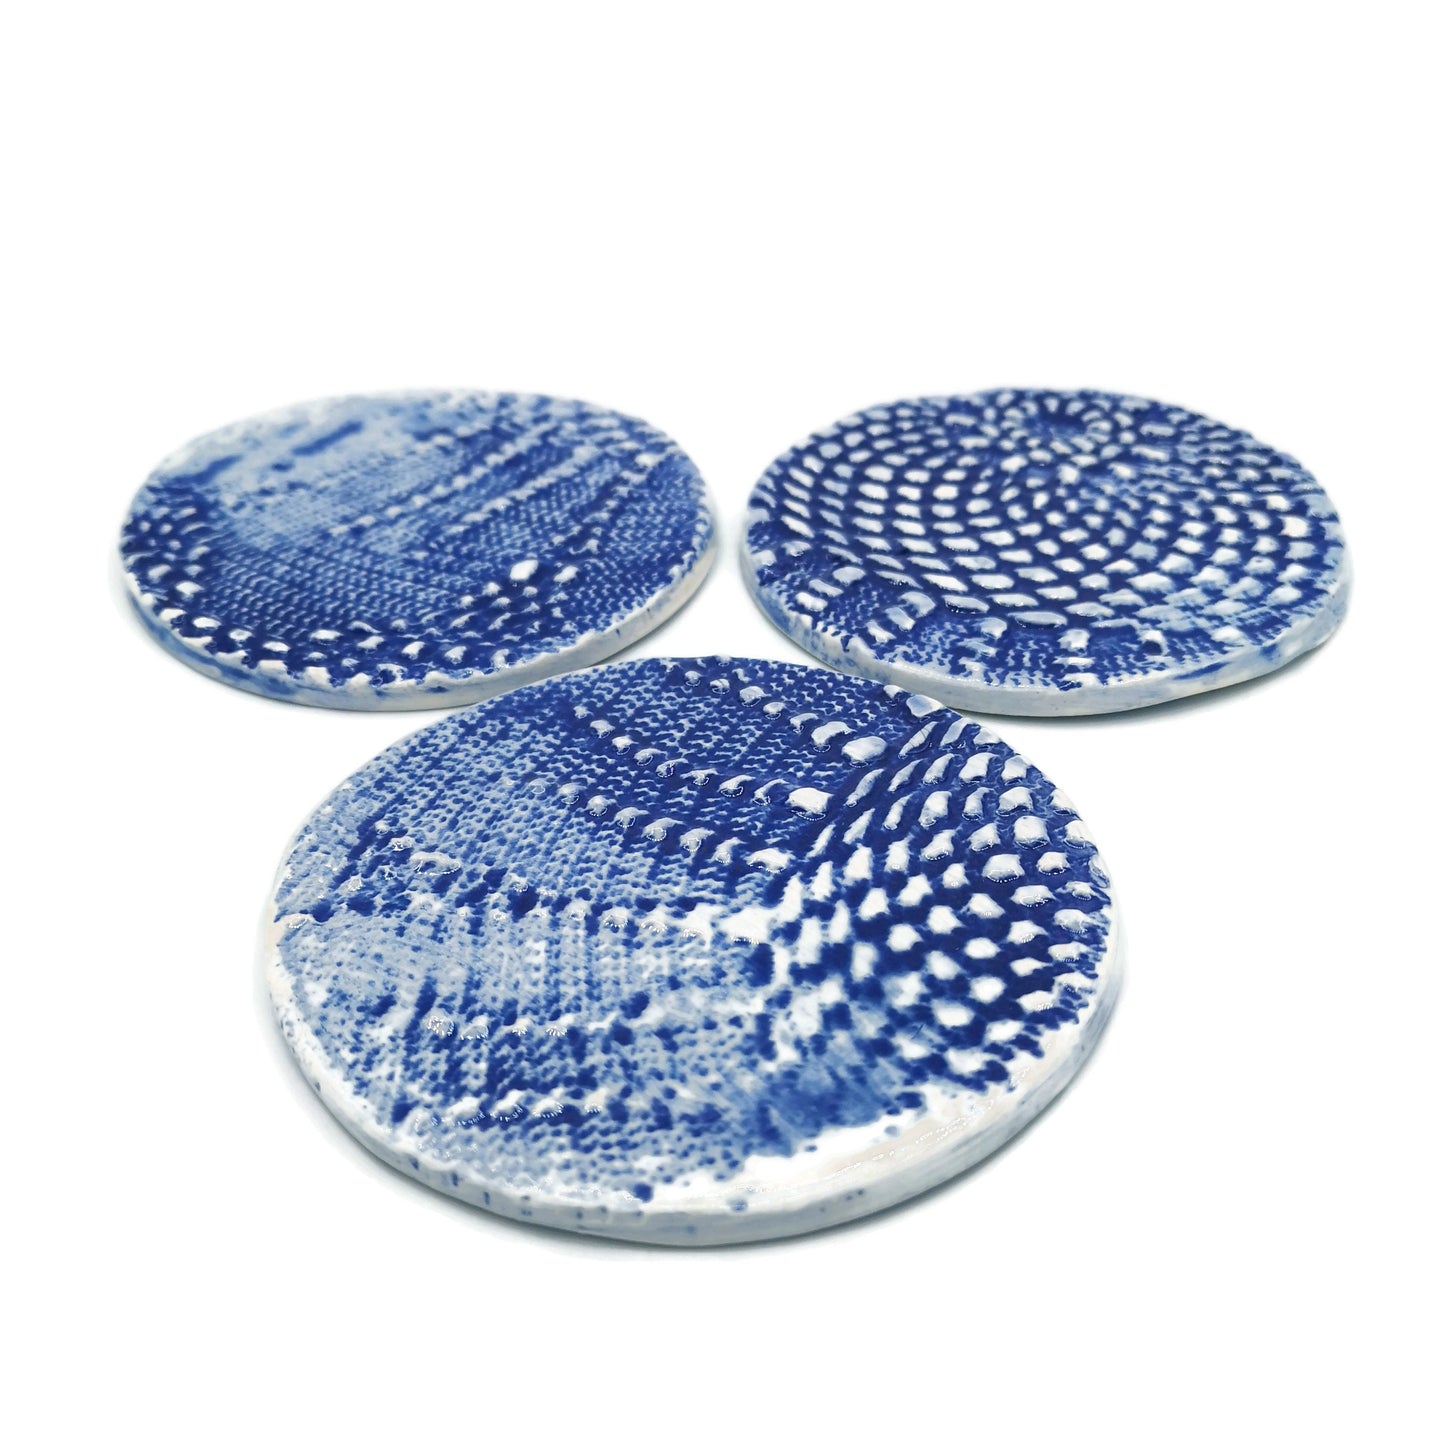 3Pc 11cm/4,3in Blue Handmade Ceramic Coasters With Lace Texture And Cork Back, Assorted Round Shape Trivet, Office Desk Accessories For Him - Ceramica Ana Rafael